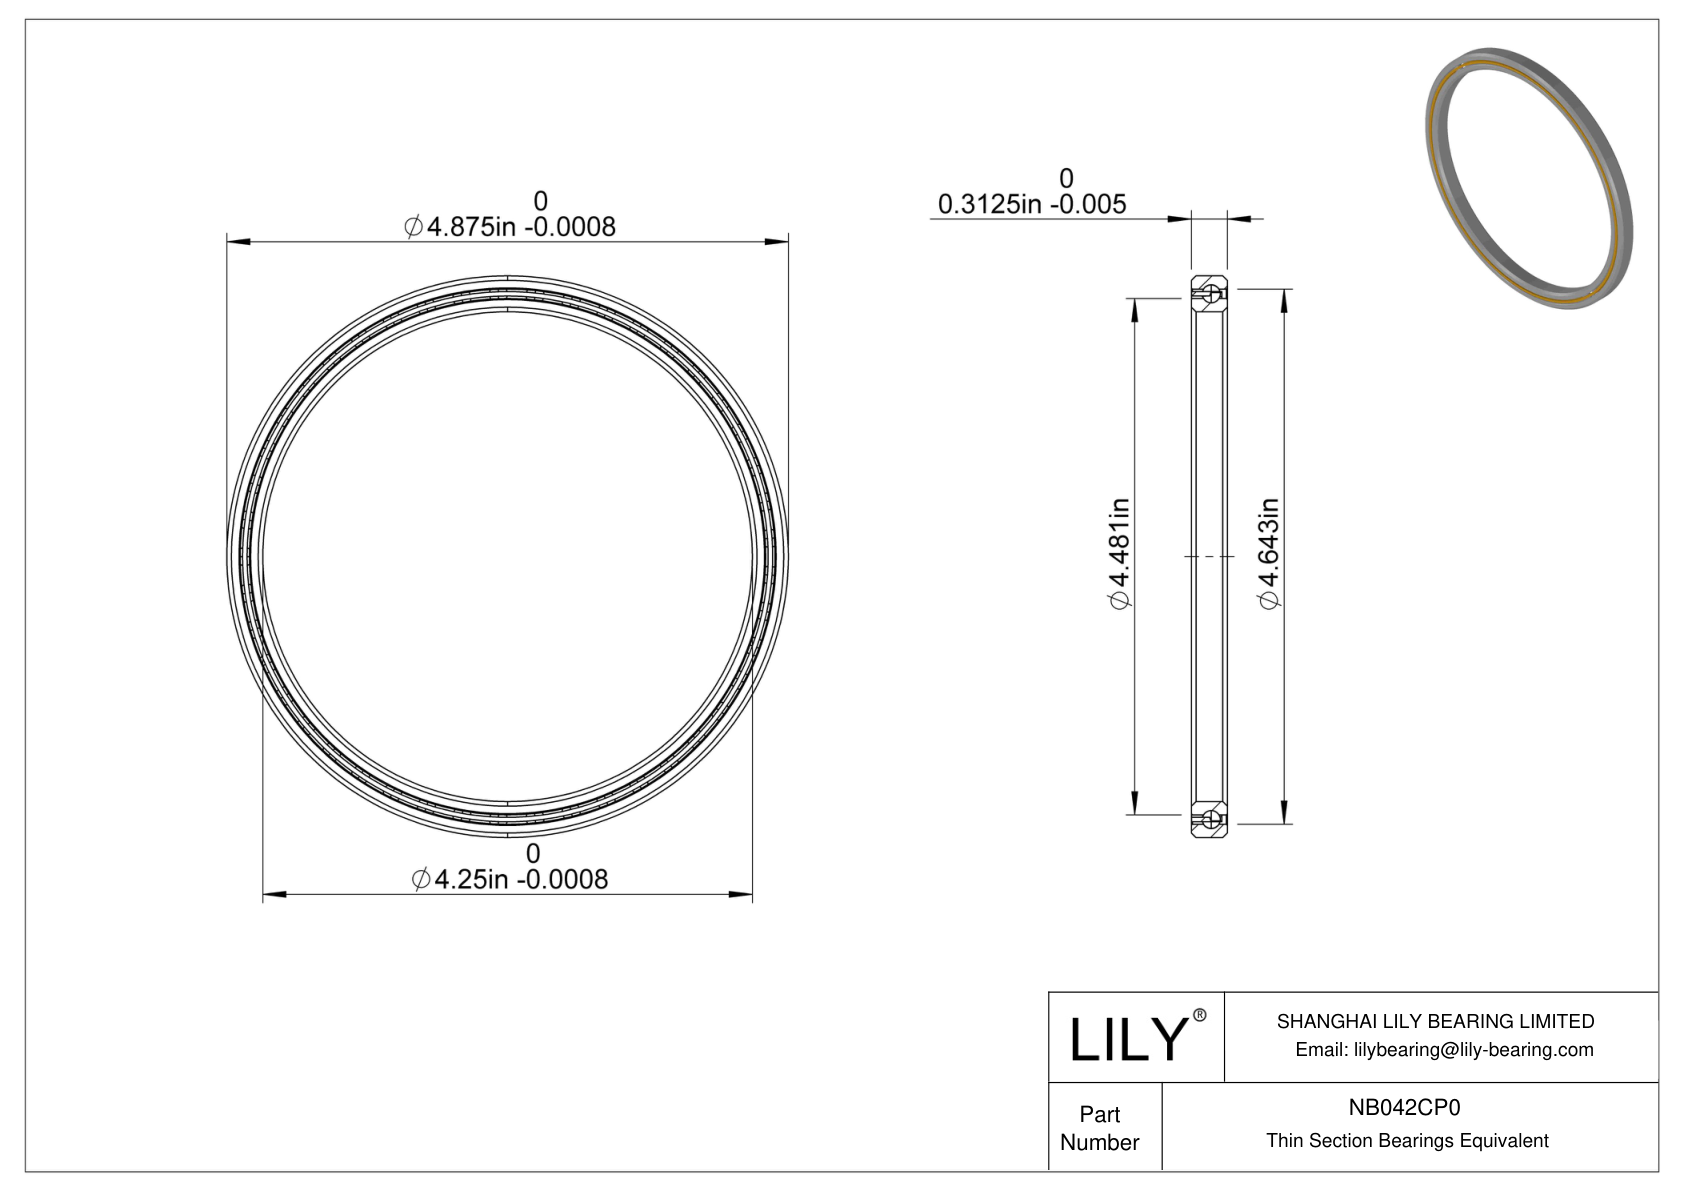 NB042CP0 Constant Section (CS) Bearings cad drawing